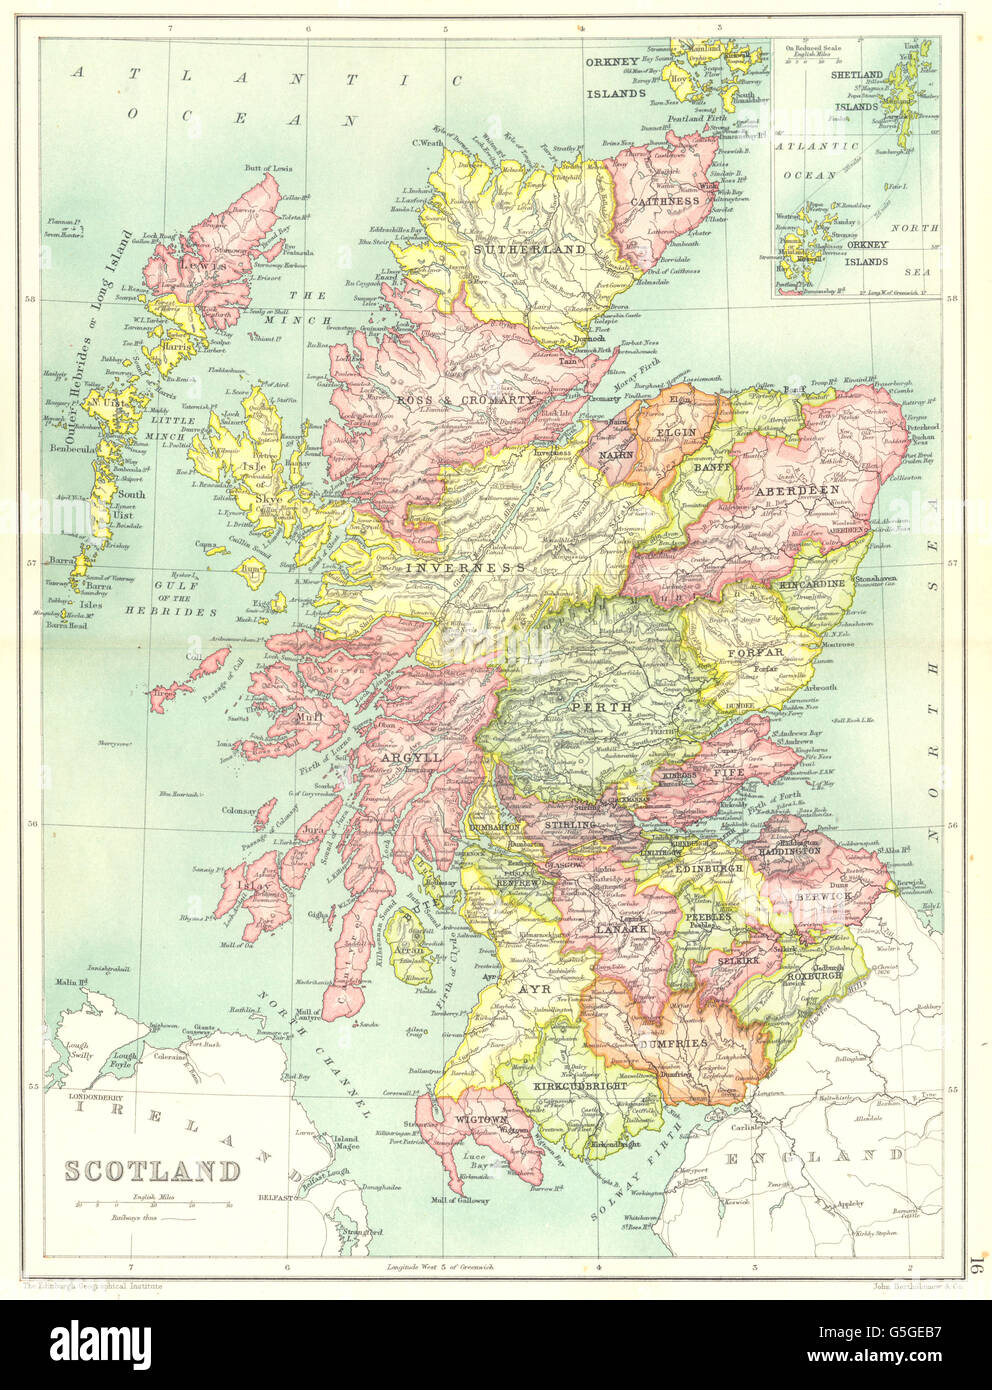 Shetland Isles BUTLER 1888 map SCOTLAND Showing counties; Inset central belt 